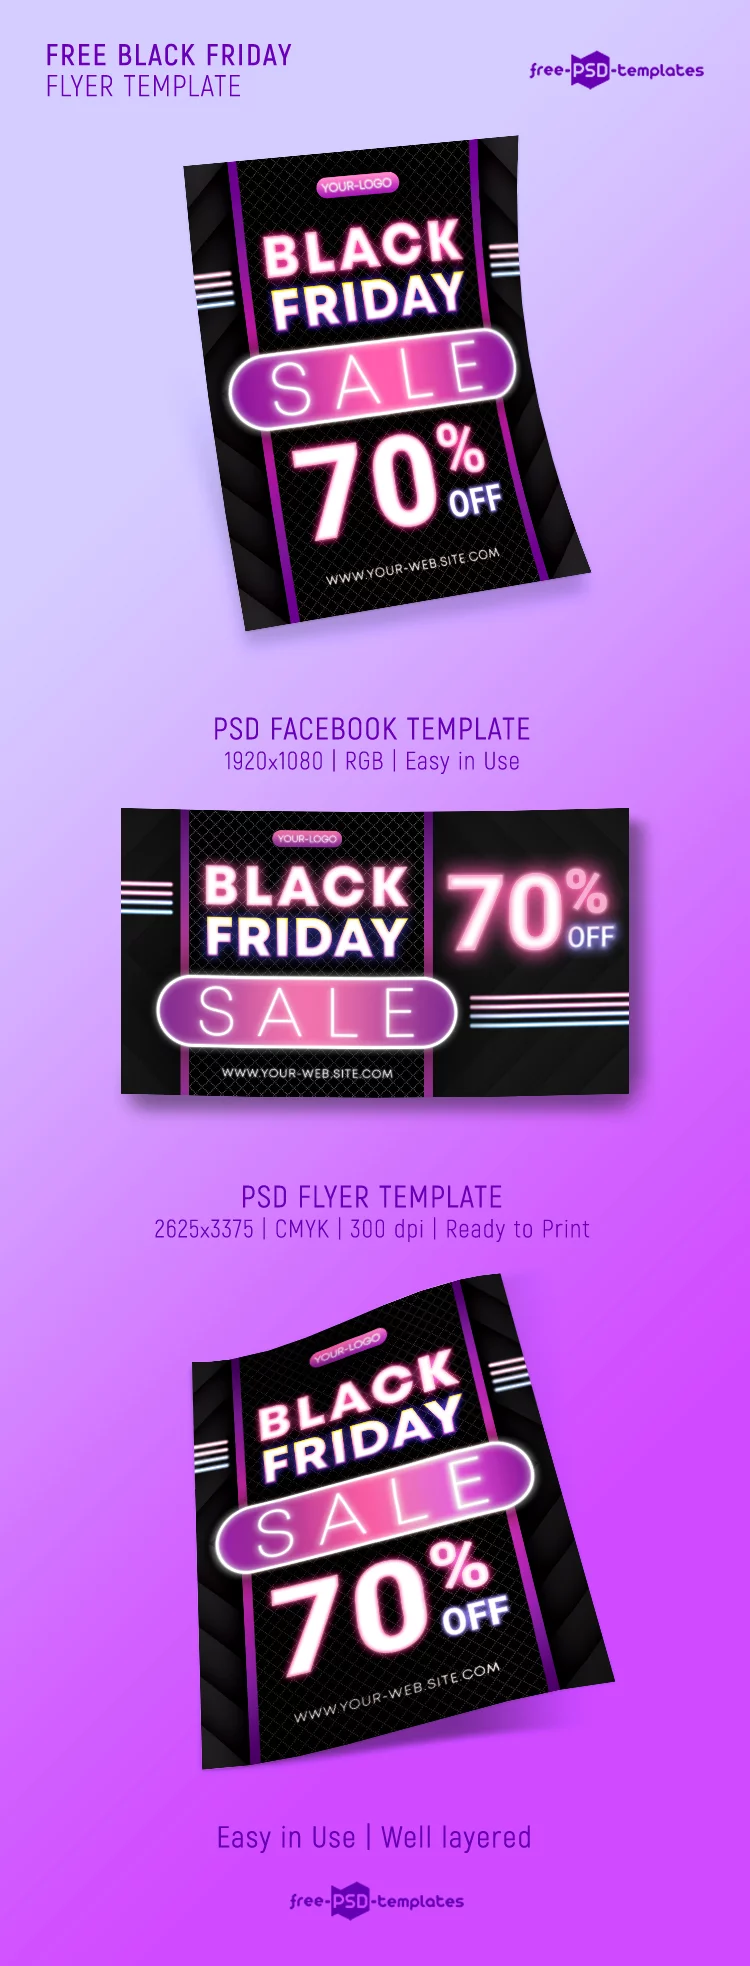 Free Black Friday Flyer Template